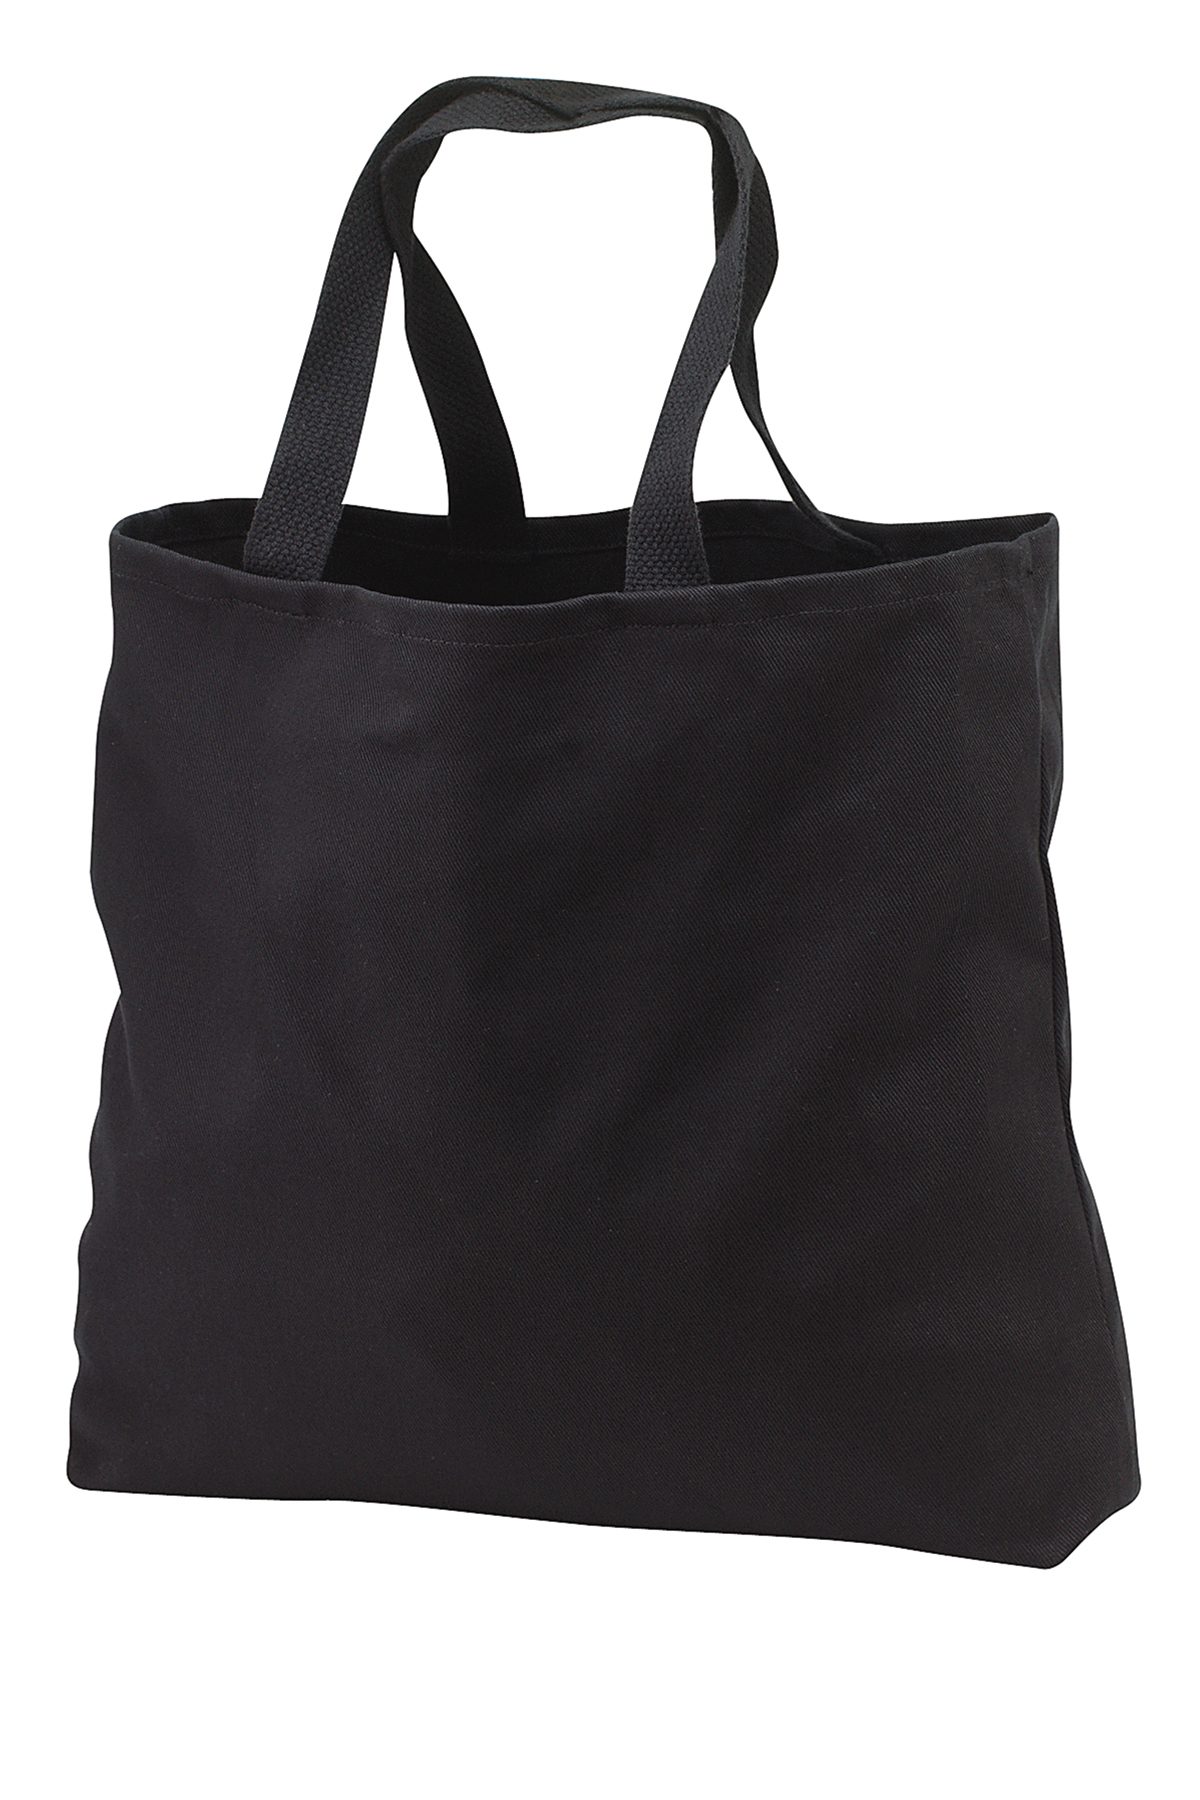 Port Authority - Ideal Twill Convention Tote | Product | SanMar